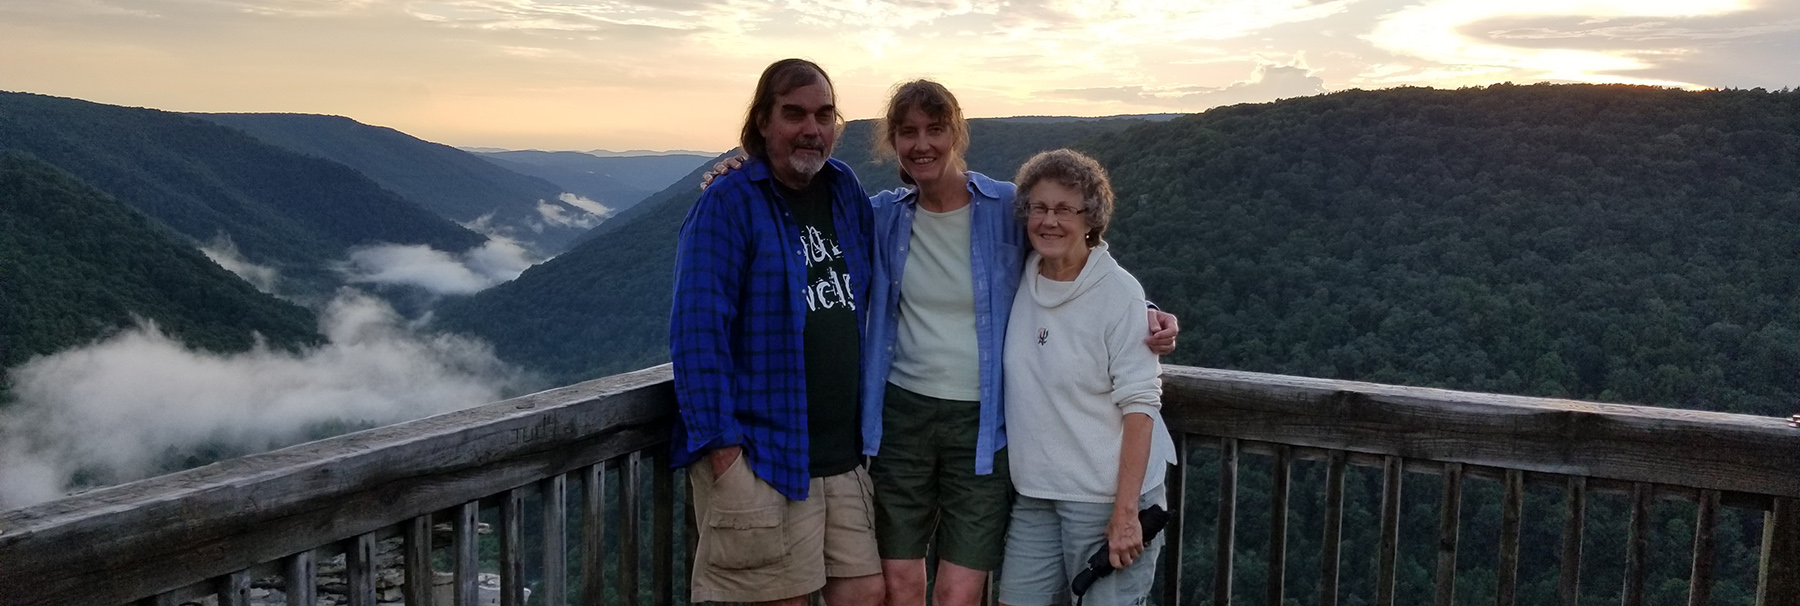 Petra Bohall Wood pictured with her family in front of a mountain rangeily 